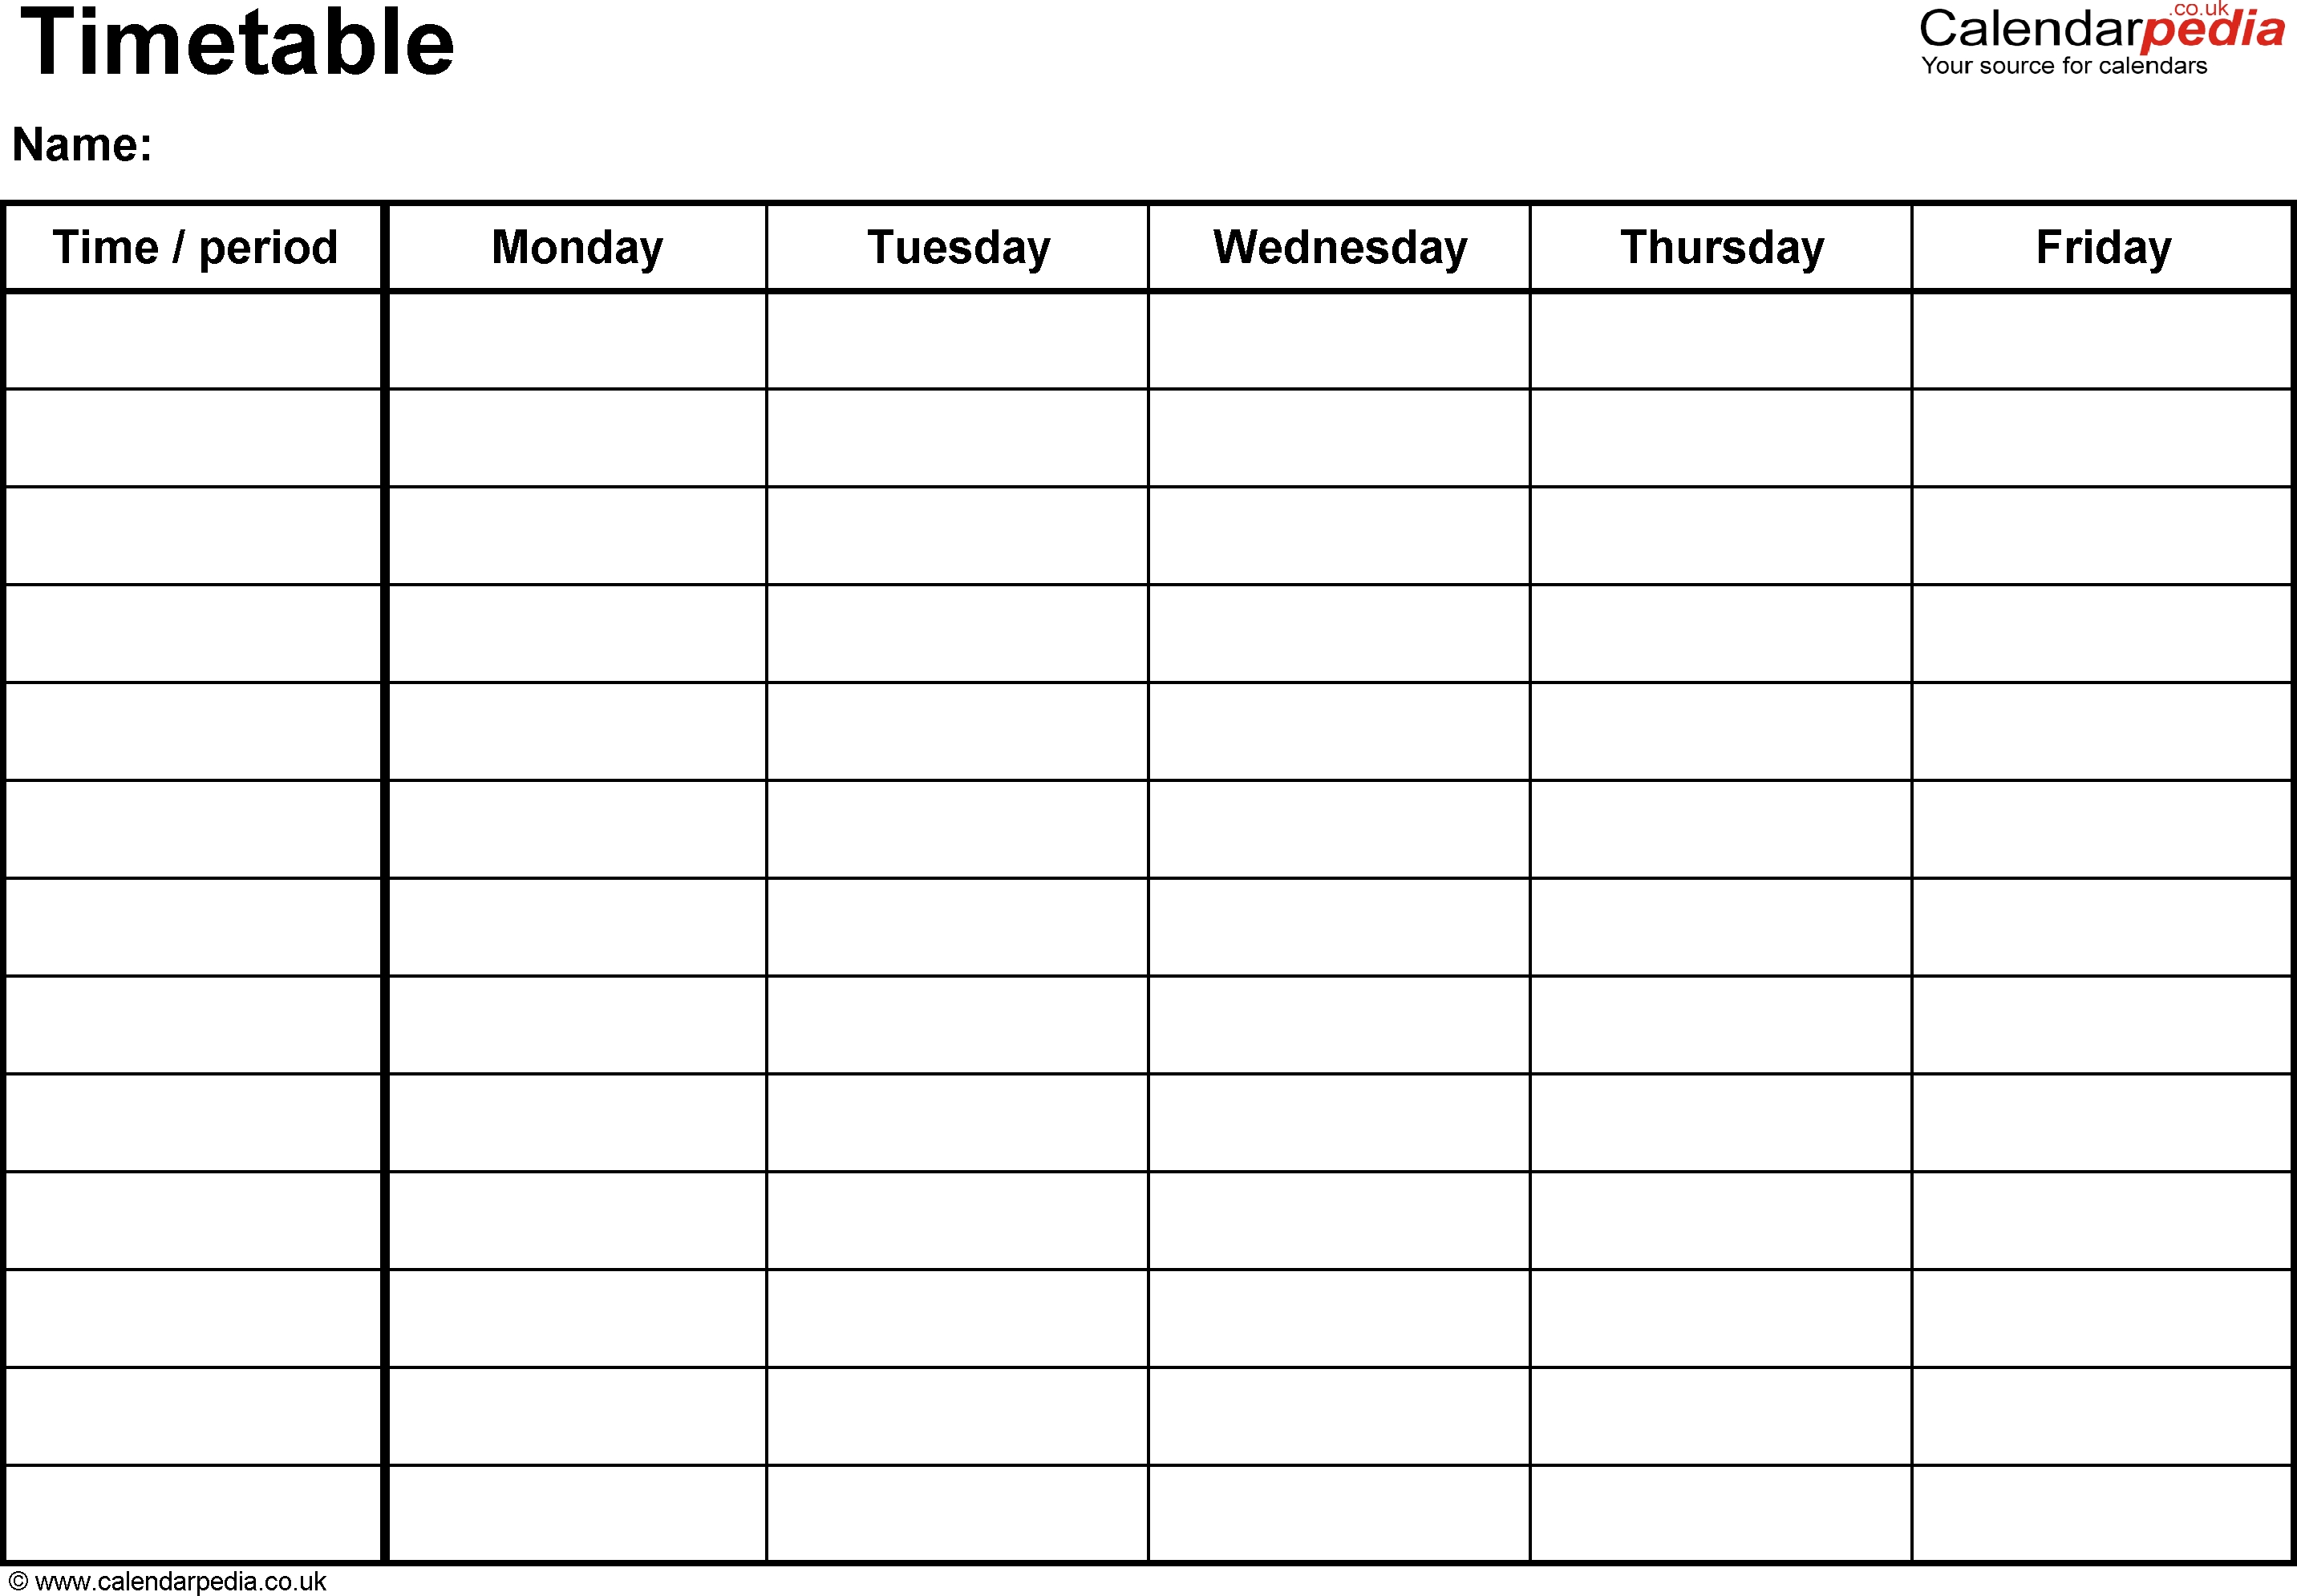 Timetables As Free Printable Templates For Microsoft Word Schedule in Printable Monthly Calendar Template Monday Through Friday